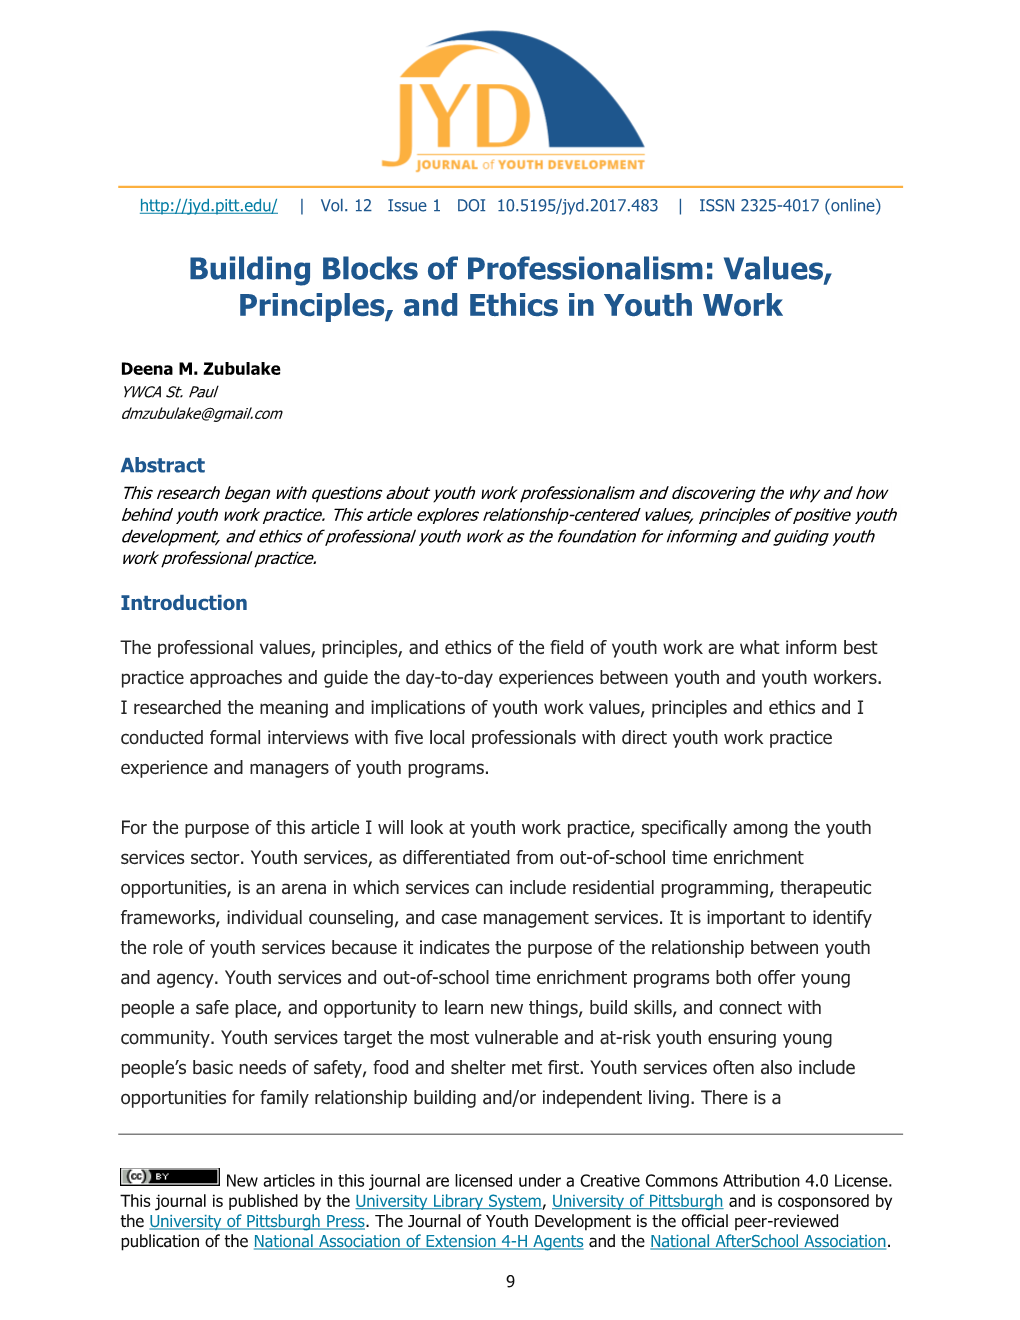 Values, Principles, and Ethics in Youth Work